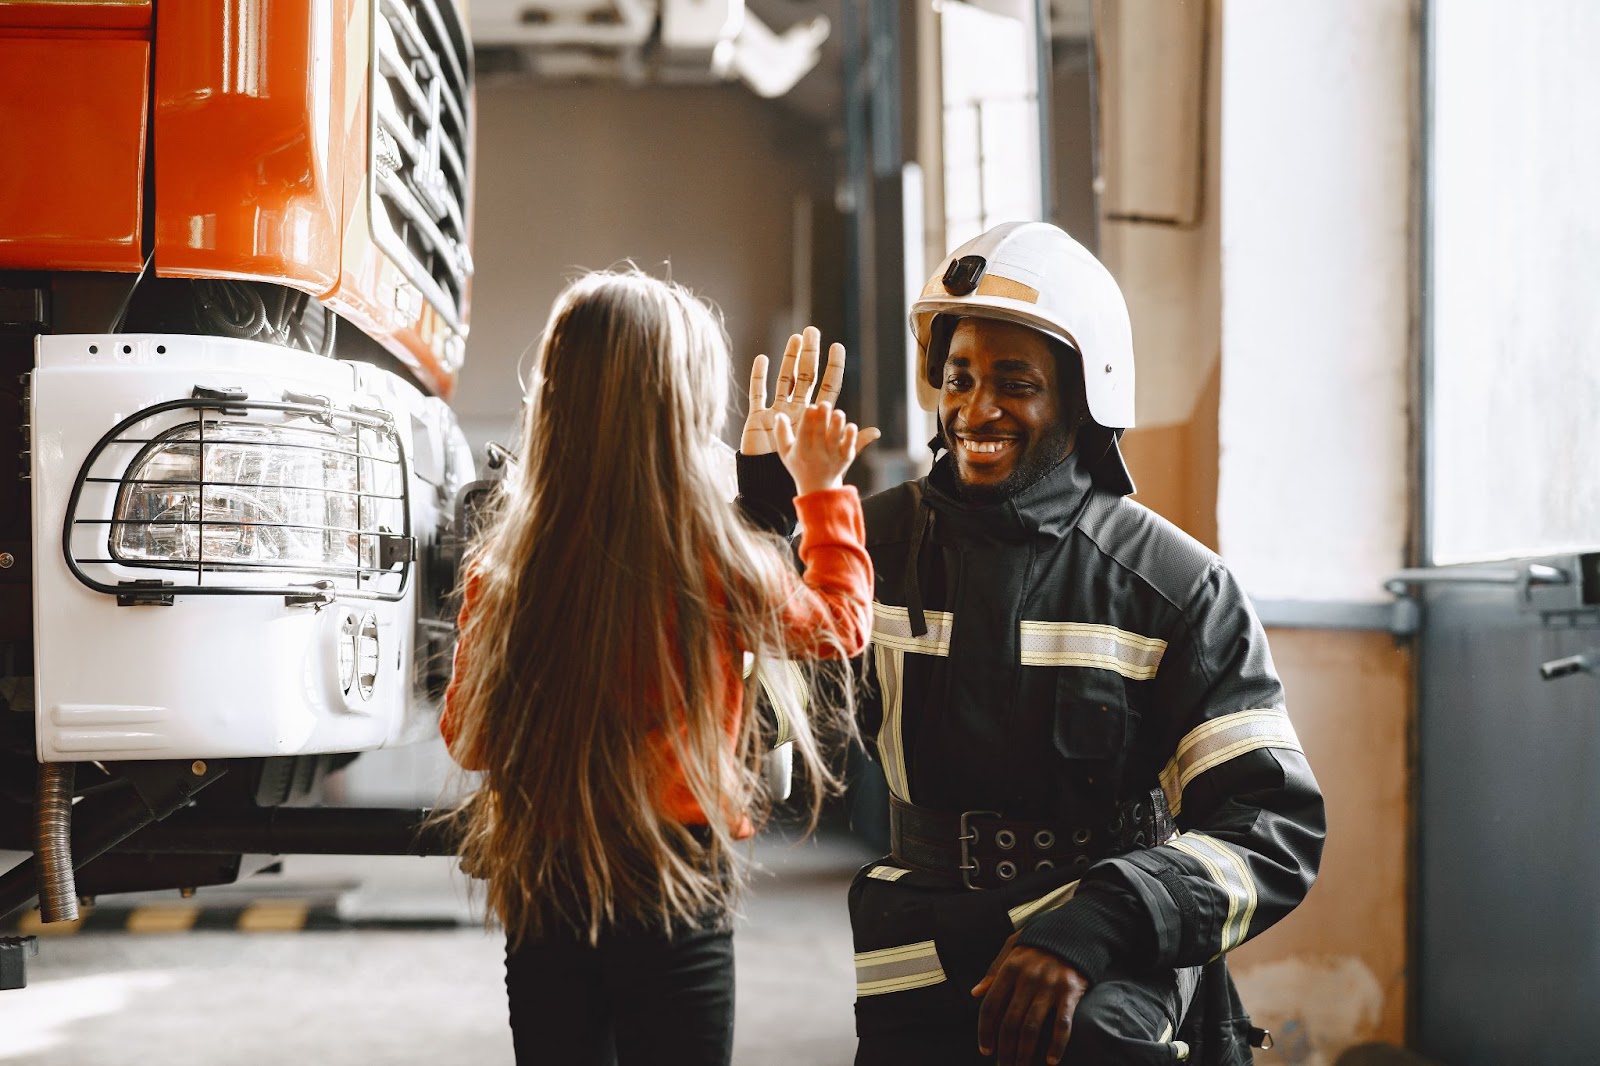 A young girl and a firefighter in a warehouse, emphasizing fire safety measures.

